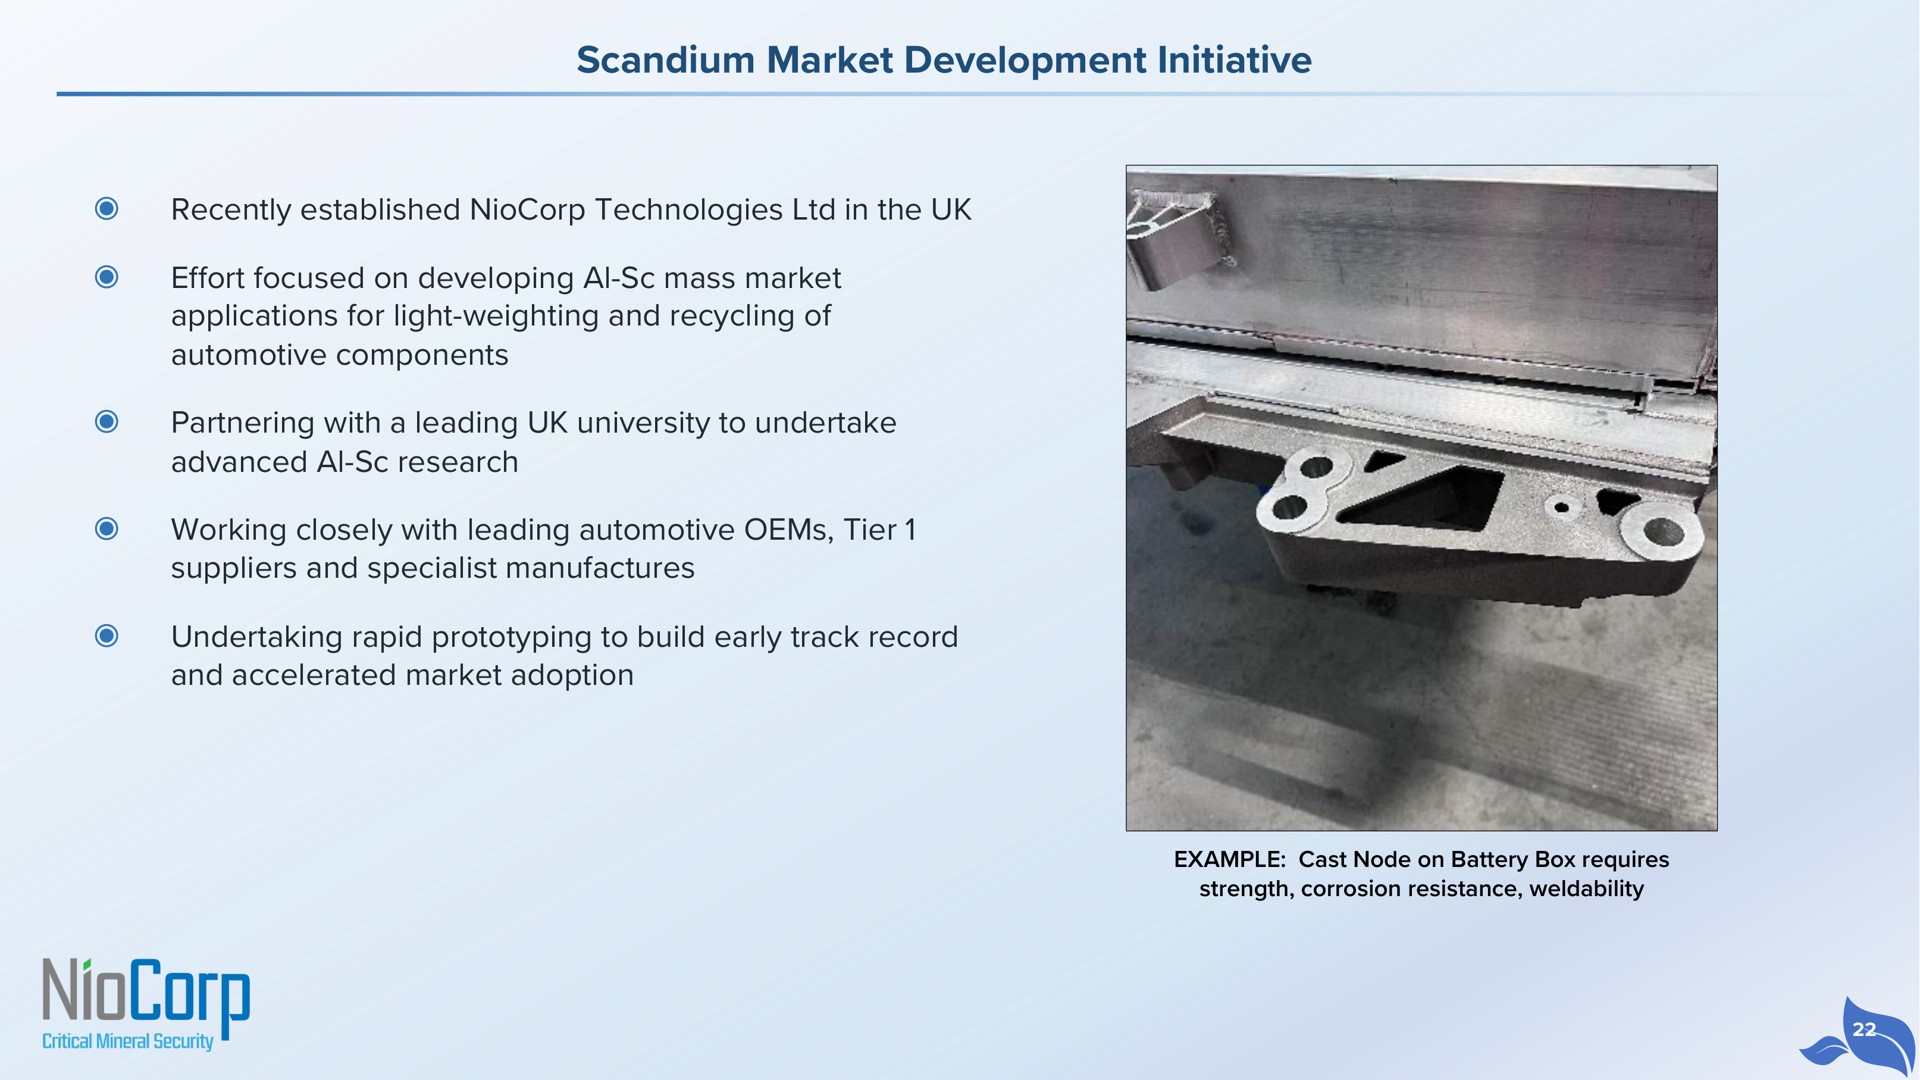 scandium market development initiative recently established technologies in the effort focused on developing mass market applications for light weighting and recycling of automotive components partnering with a leading university to undertake advanced research working closely with leading automotive tier suppliers and specialist manufactures undertaking rapid to build early track record and accelerated market adoption ohm | NioCorp